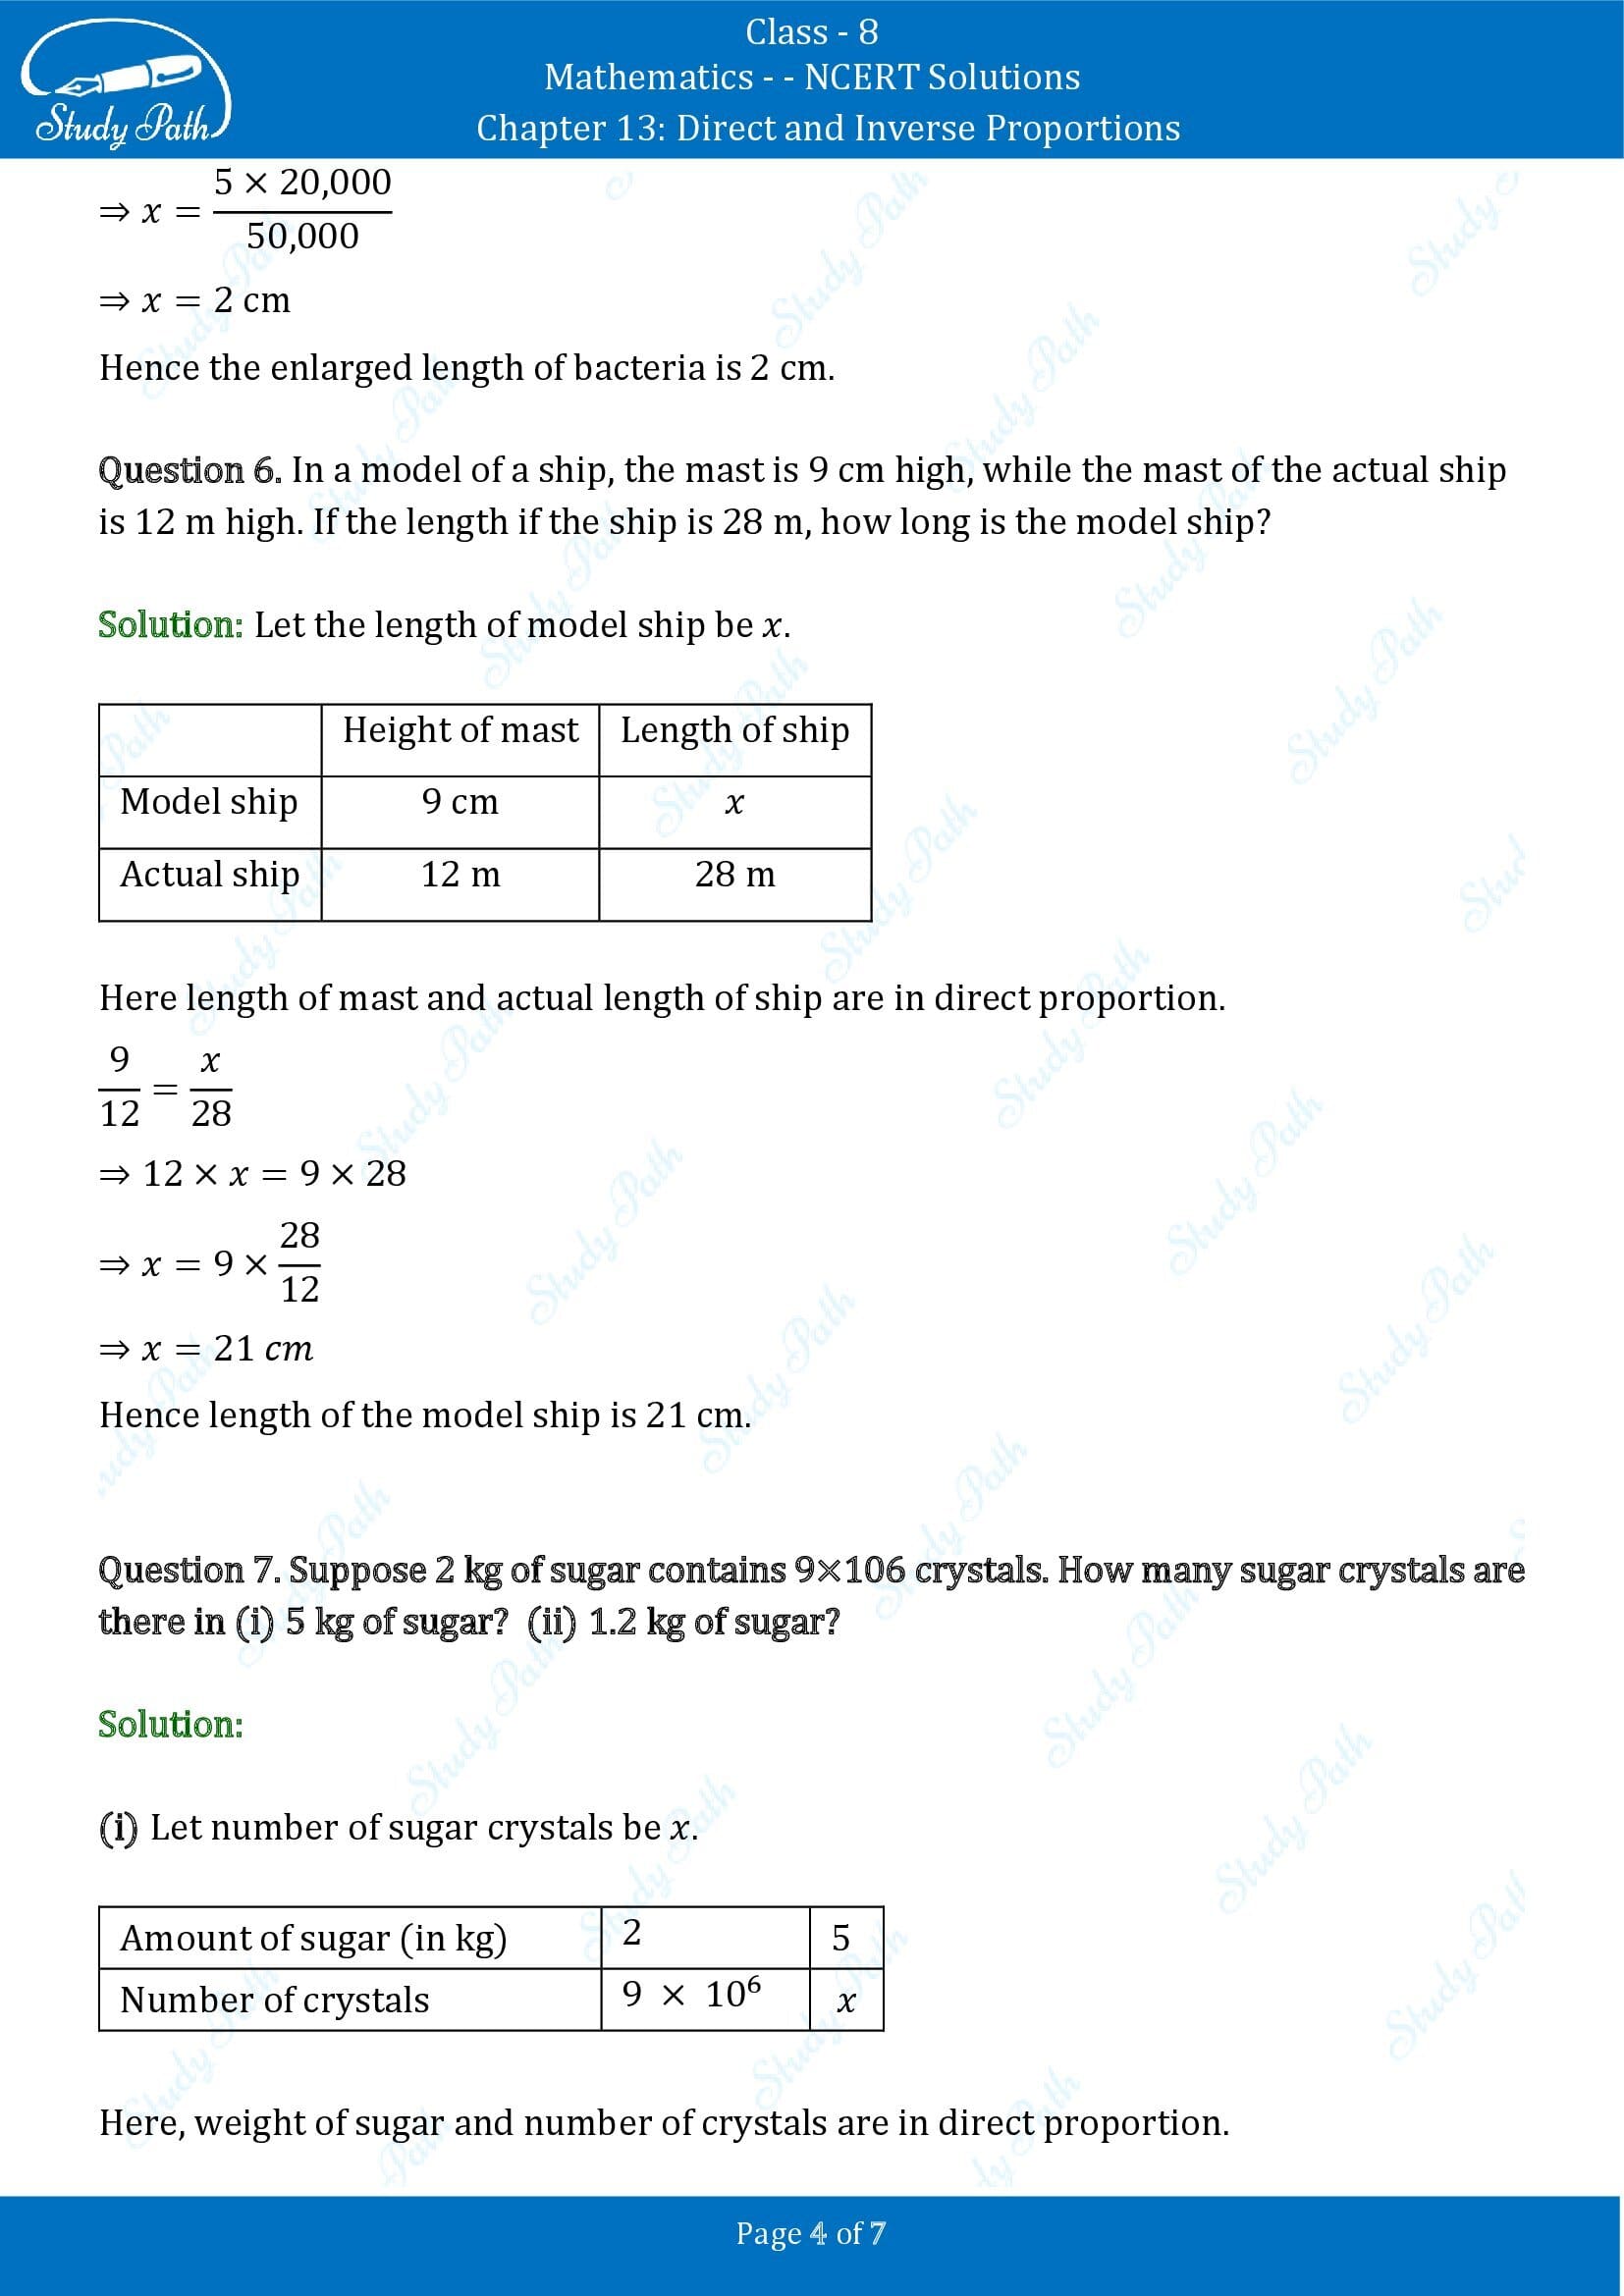 NCERT Solutions for Class 8 Maths Chapter 13 Direct and Inverse Proportions Exercise 13.1 00004